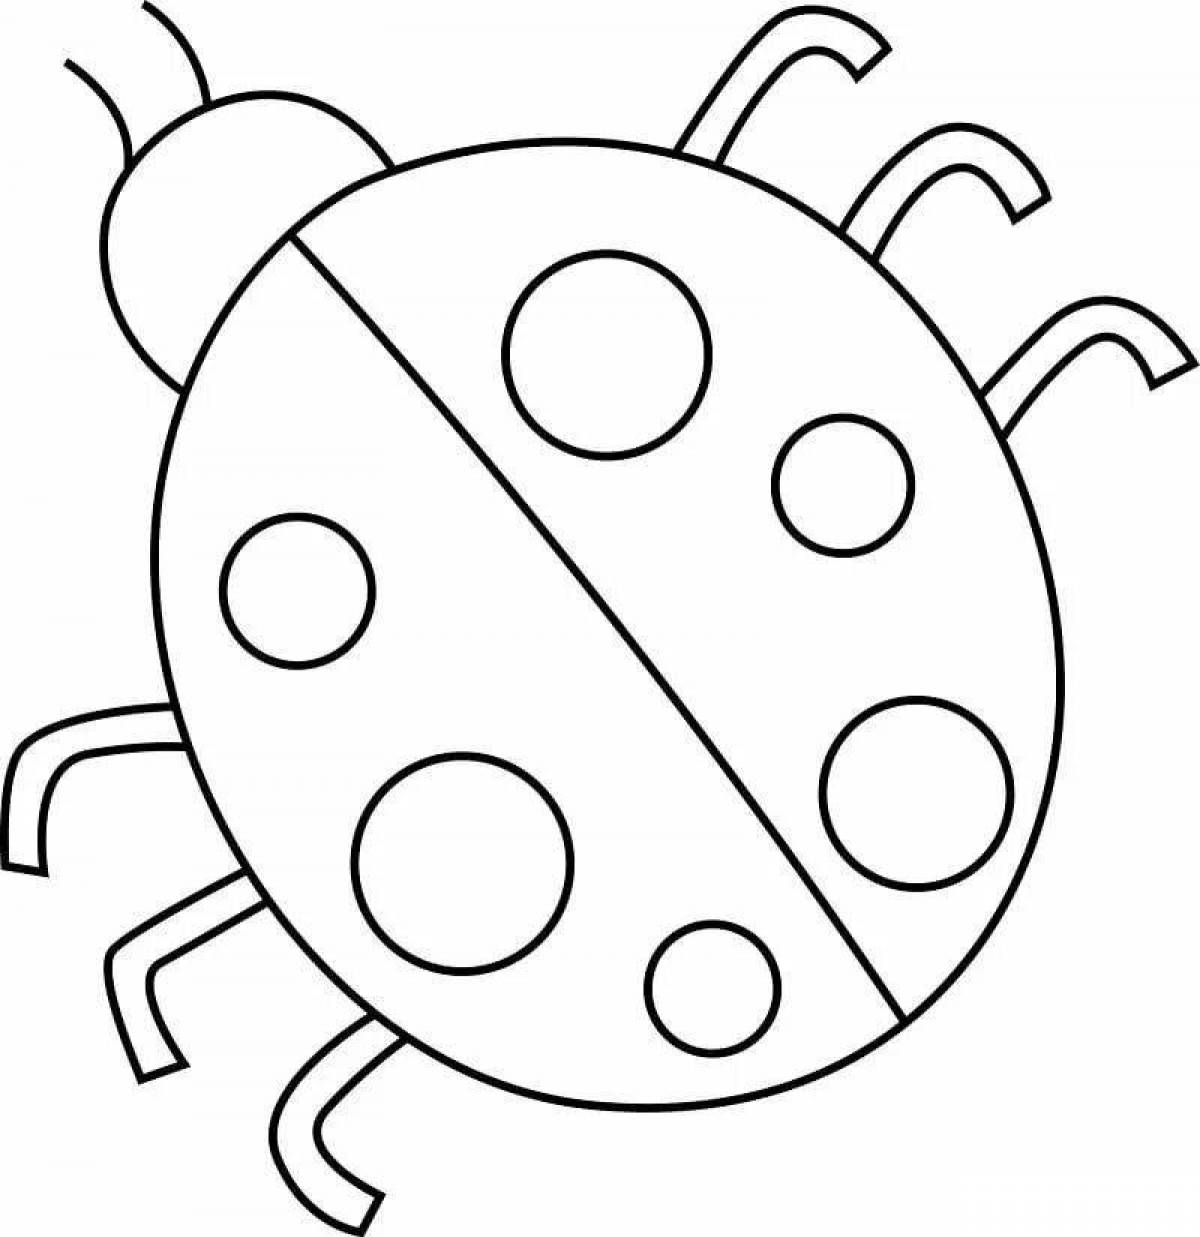 Colorful ladybug coloring page for kids